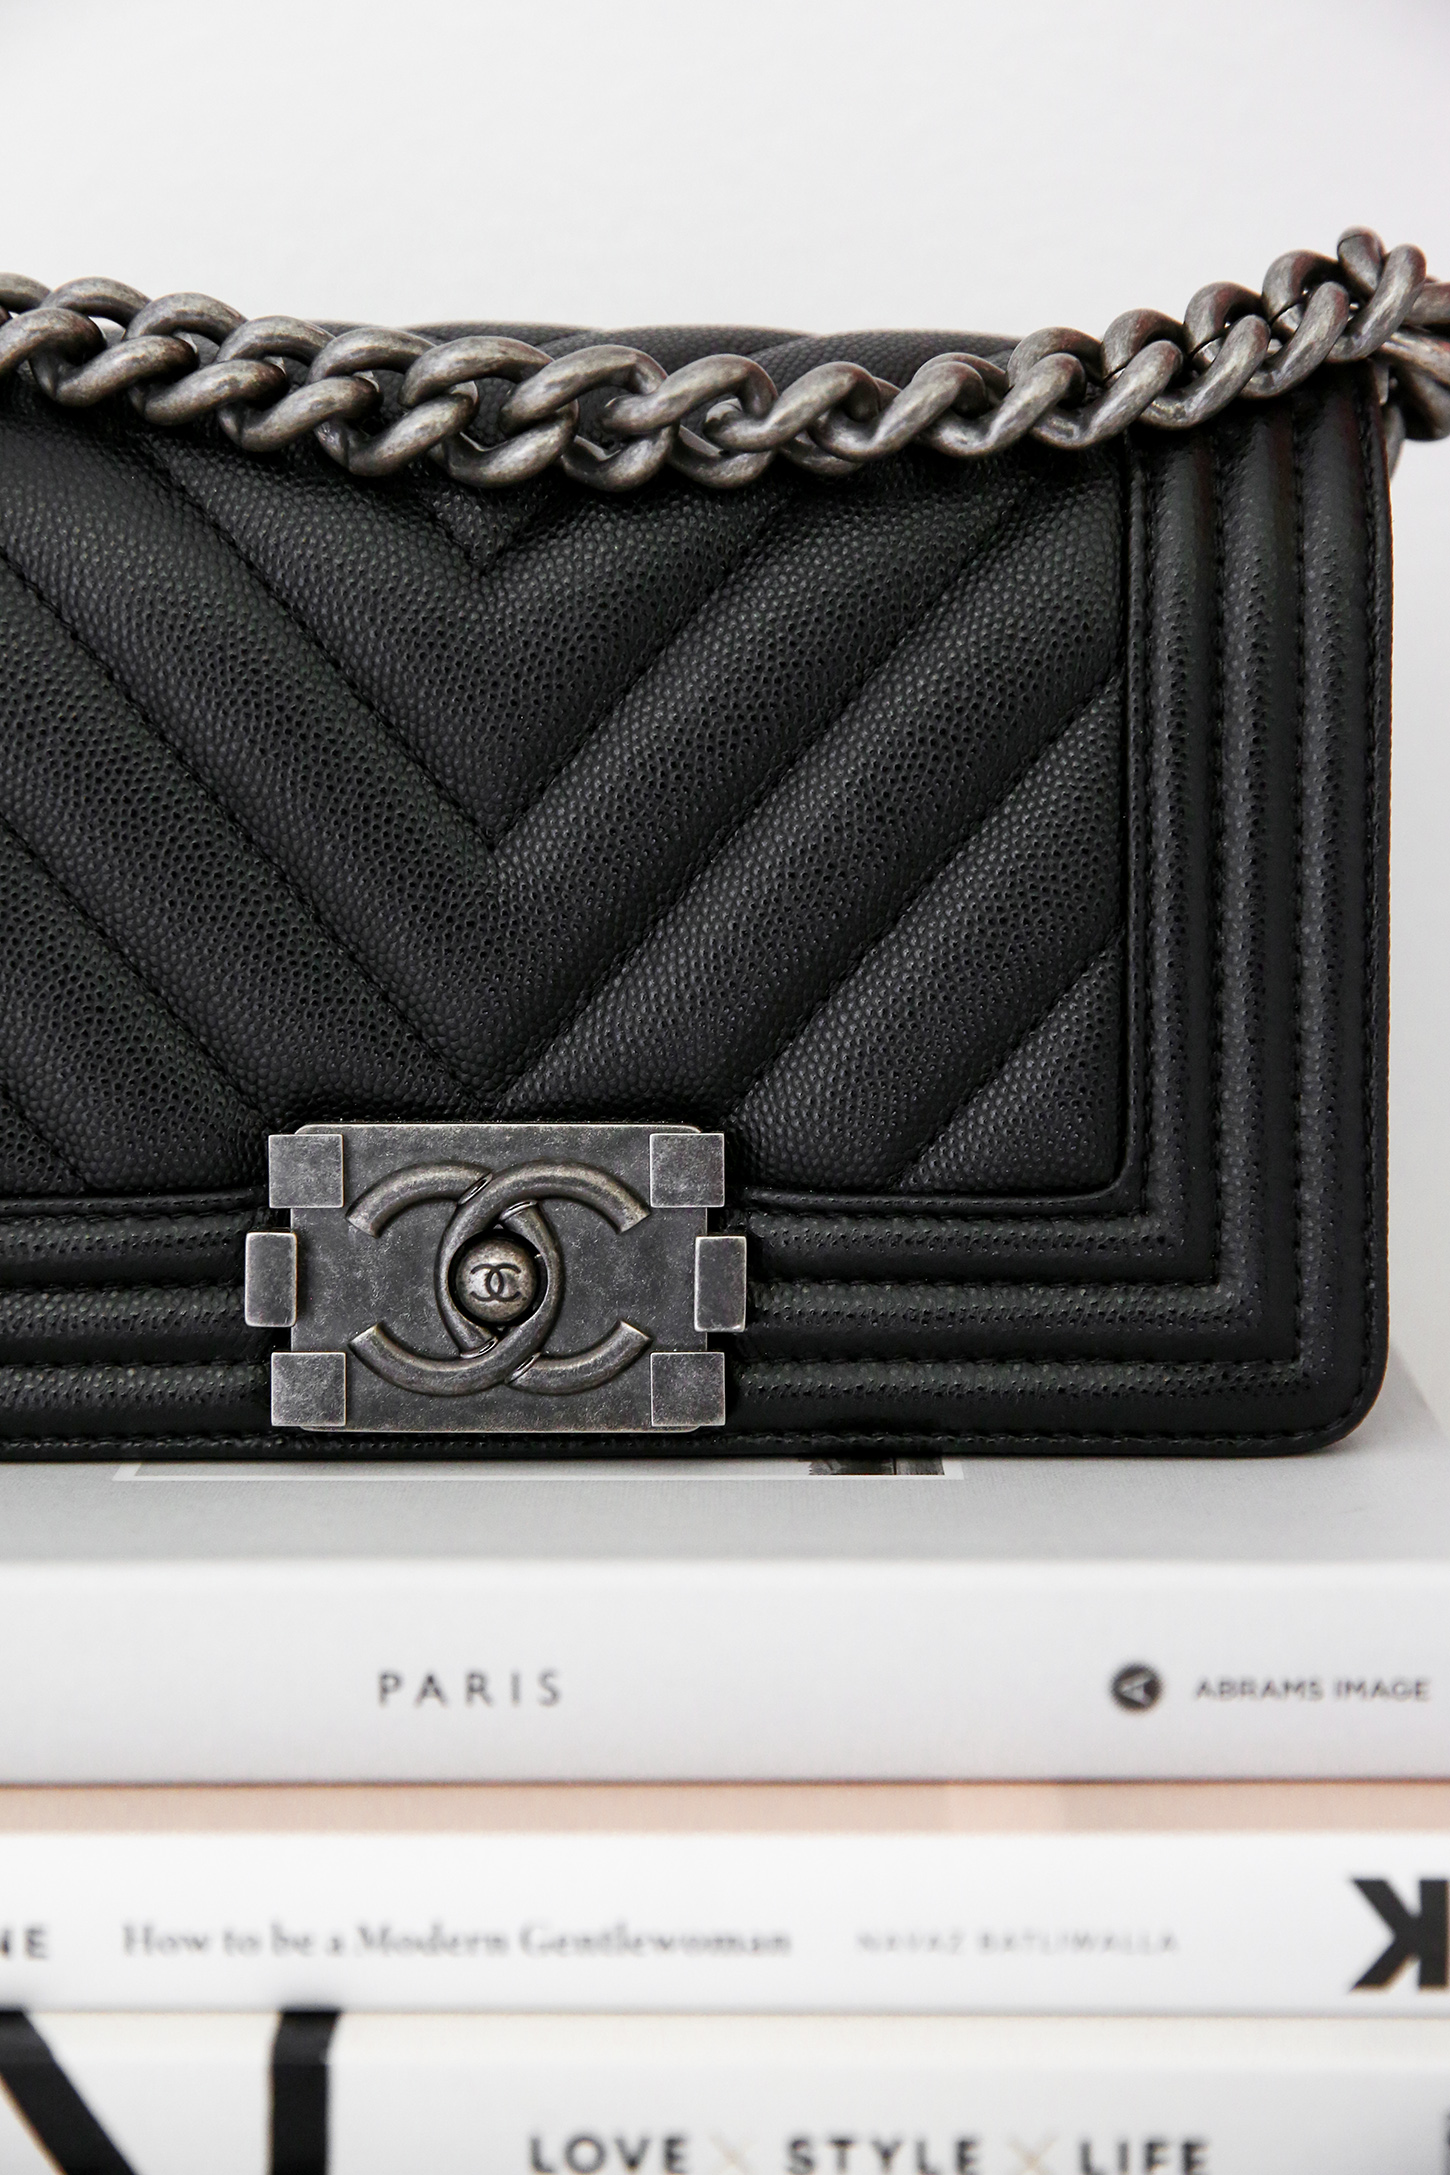 VESTIAIRE COLLECTIVE UNBOXING. The Chanel Bag Of My Dreams Or Is It? 